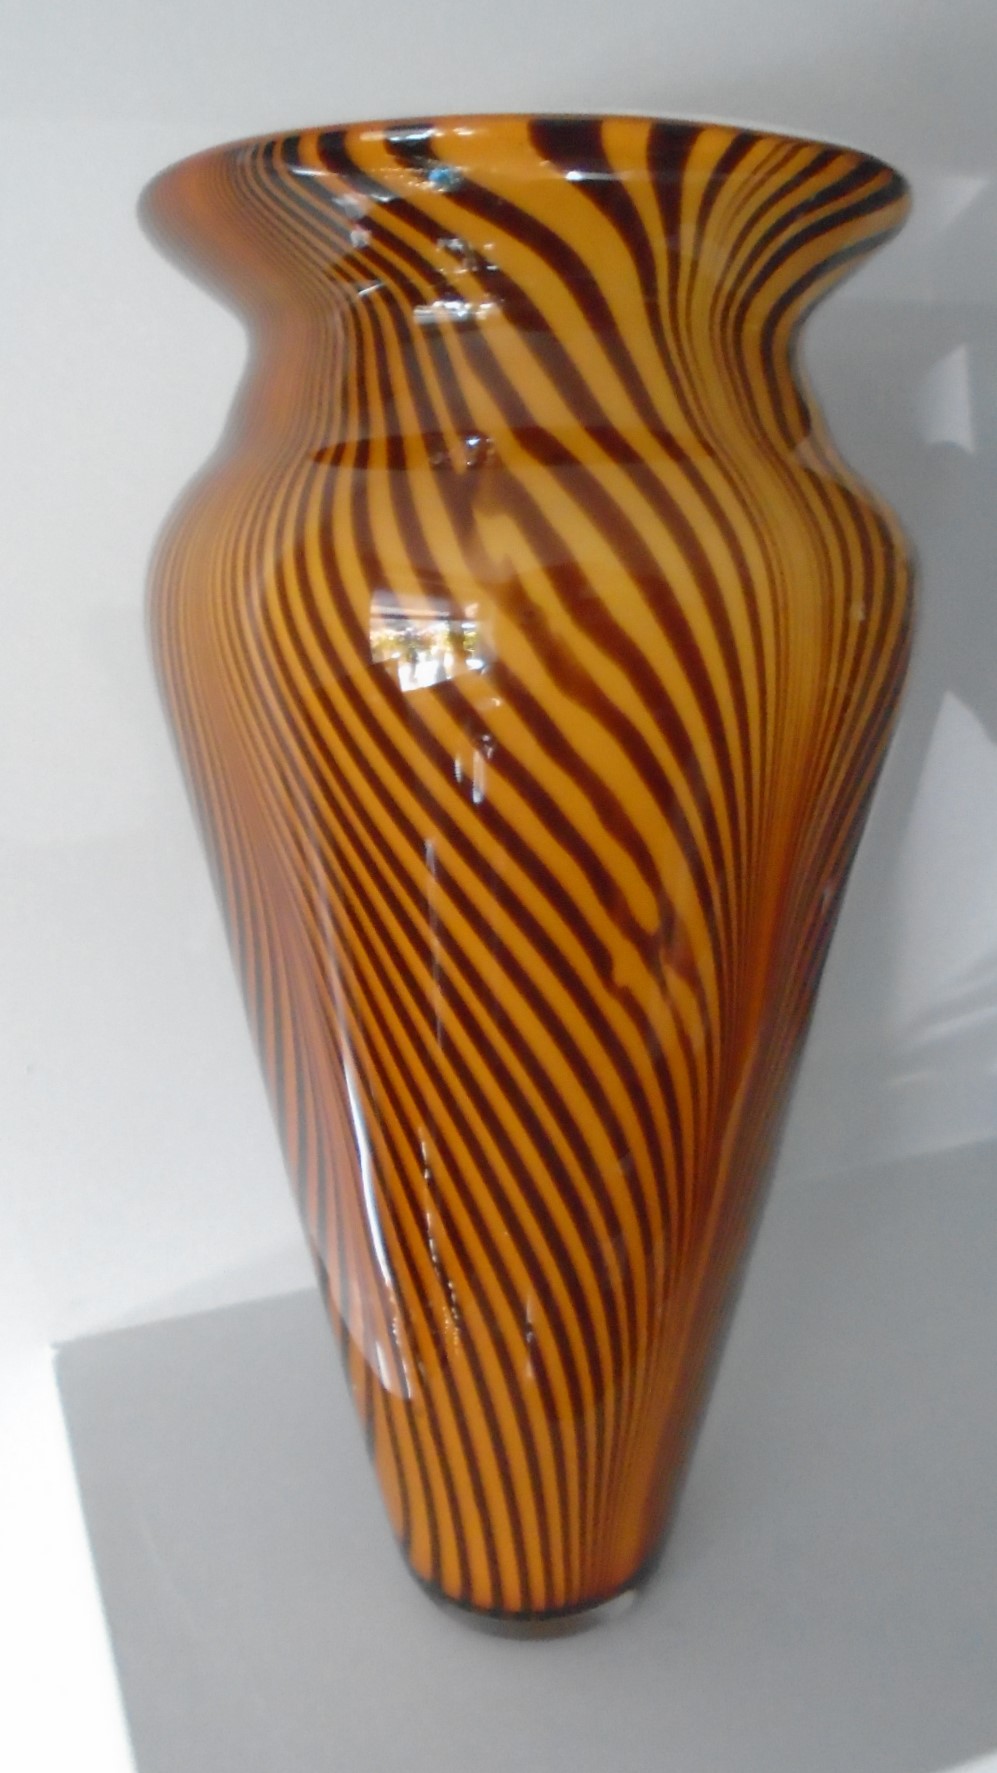 Large Stunning Italian /  Murano Style Glass Vase in a vibrant Tiger Stripe Pattern with a white glass lining.